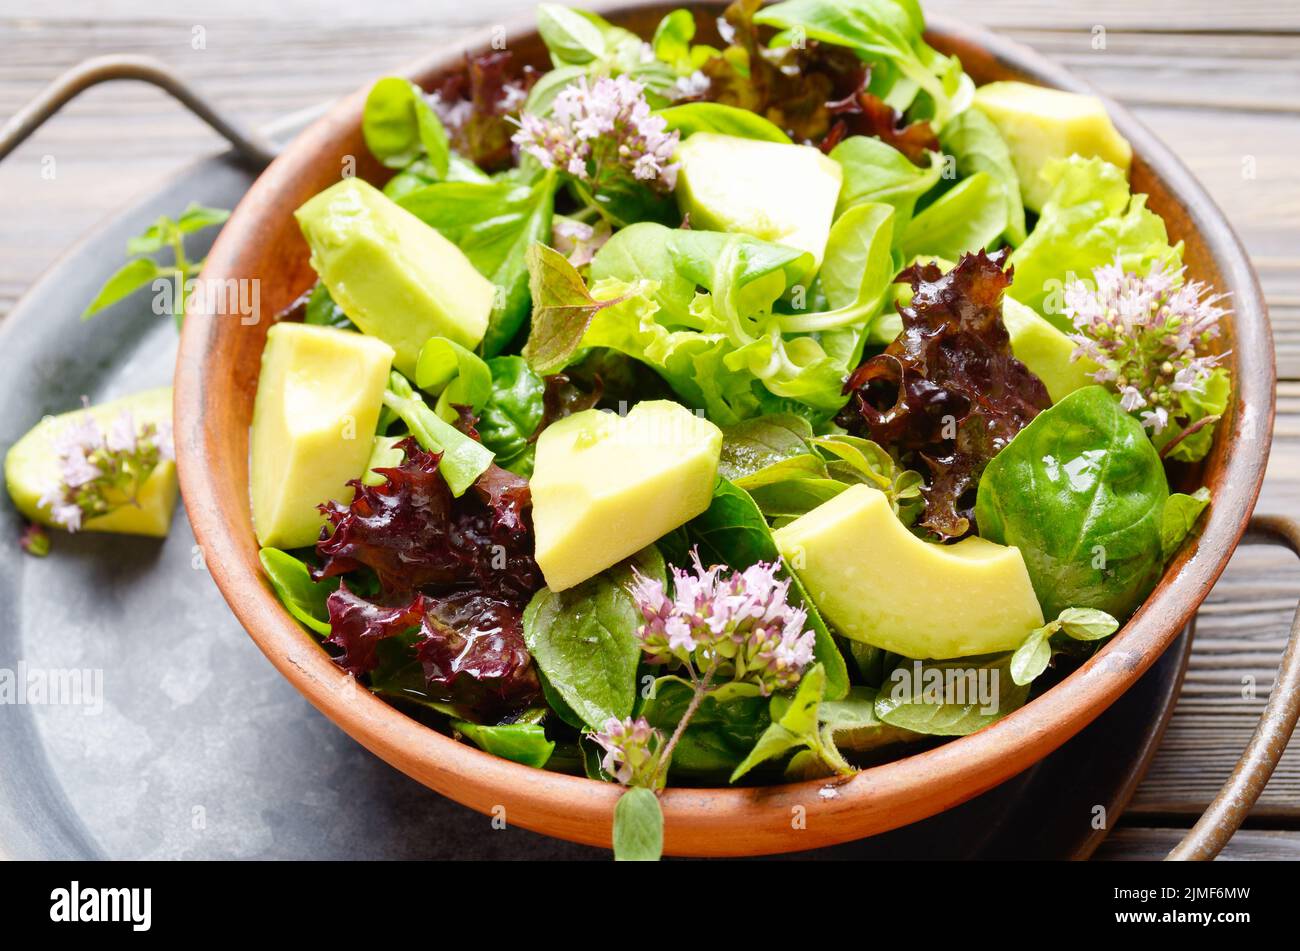 Clay dish with salad of avocado, green and violet lettuce, lamb's lettuce and oregano flowers on vintage metal tray Stock Photo